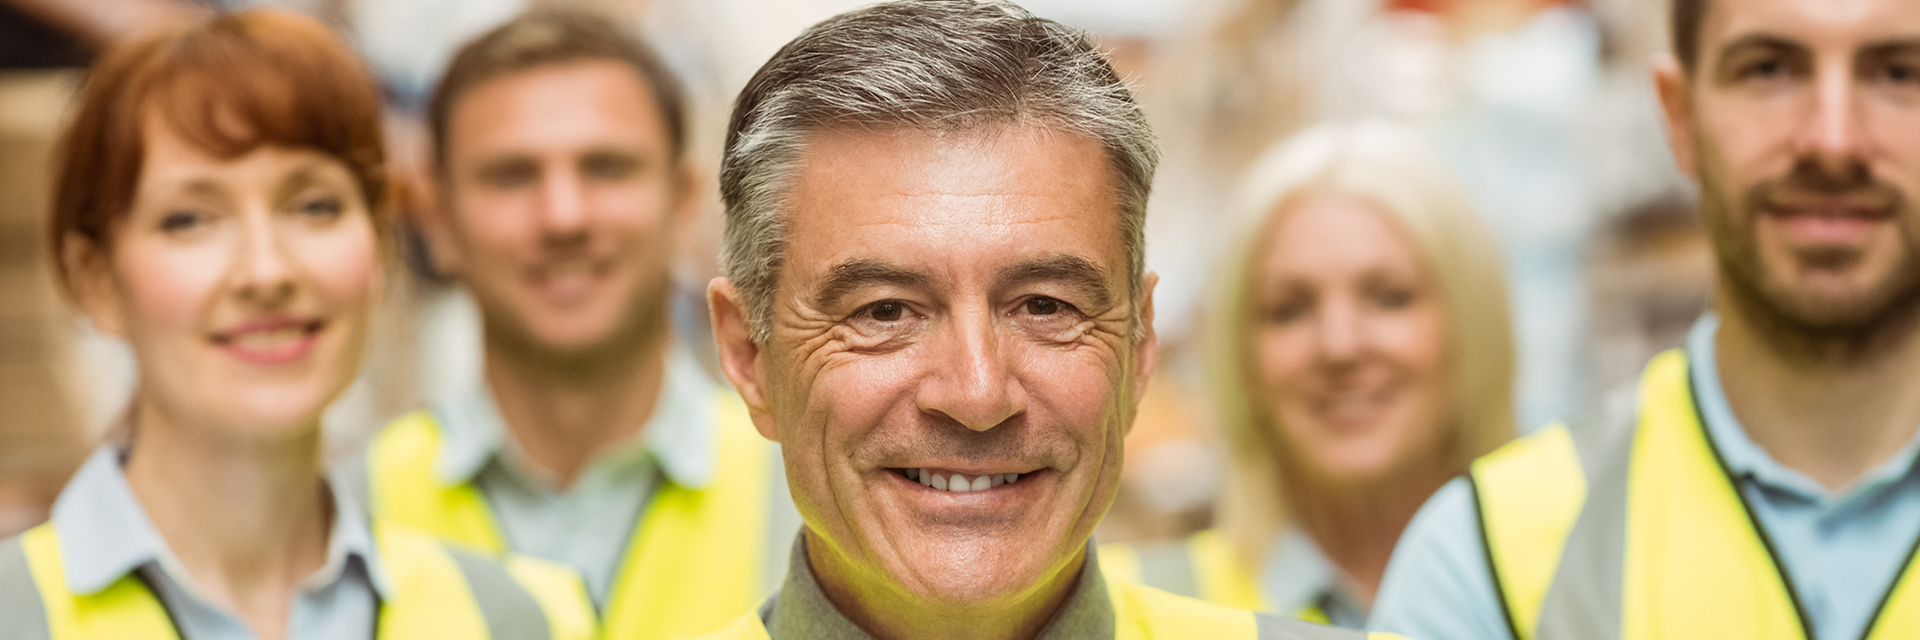 Close up of smiling group of associates wearing safety jackets